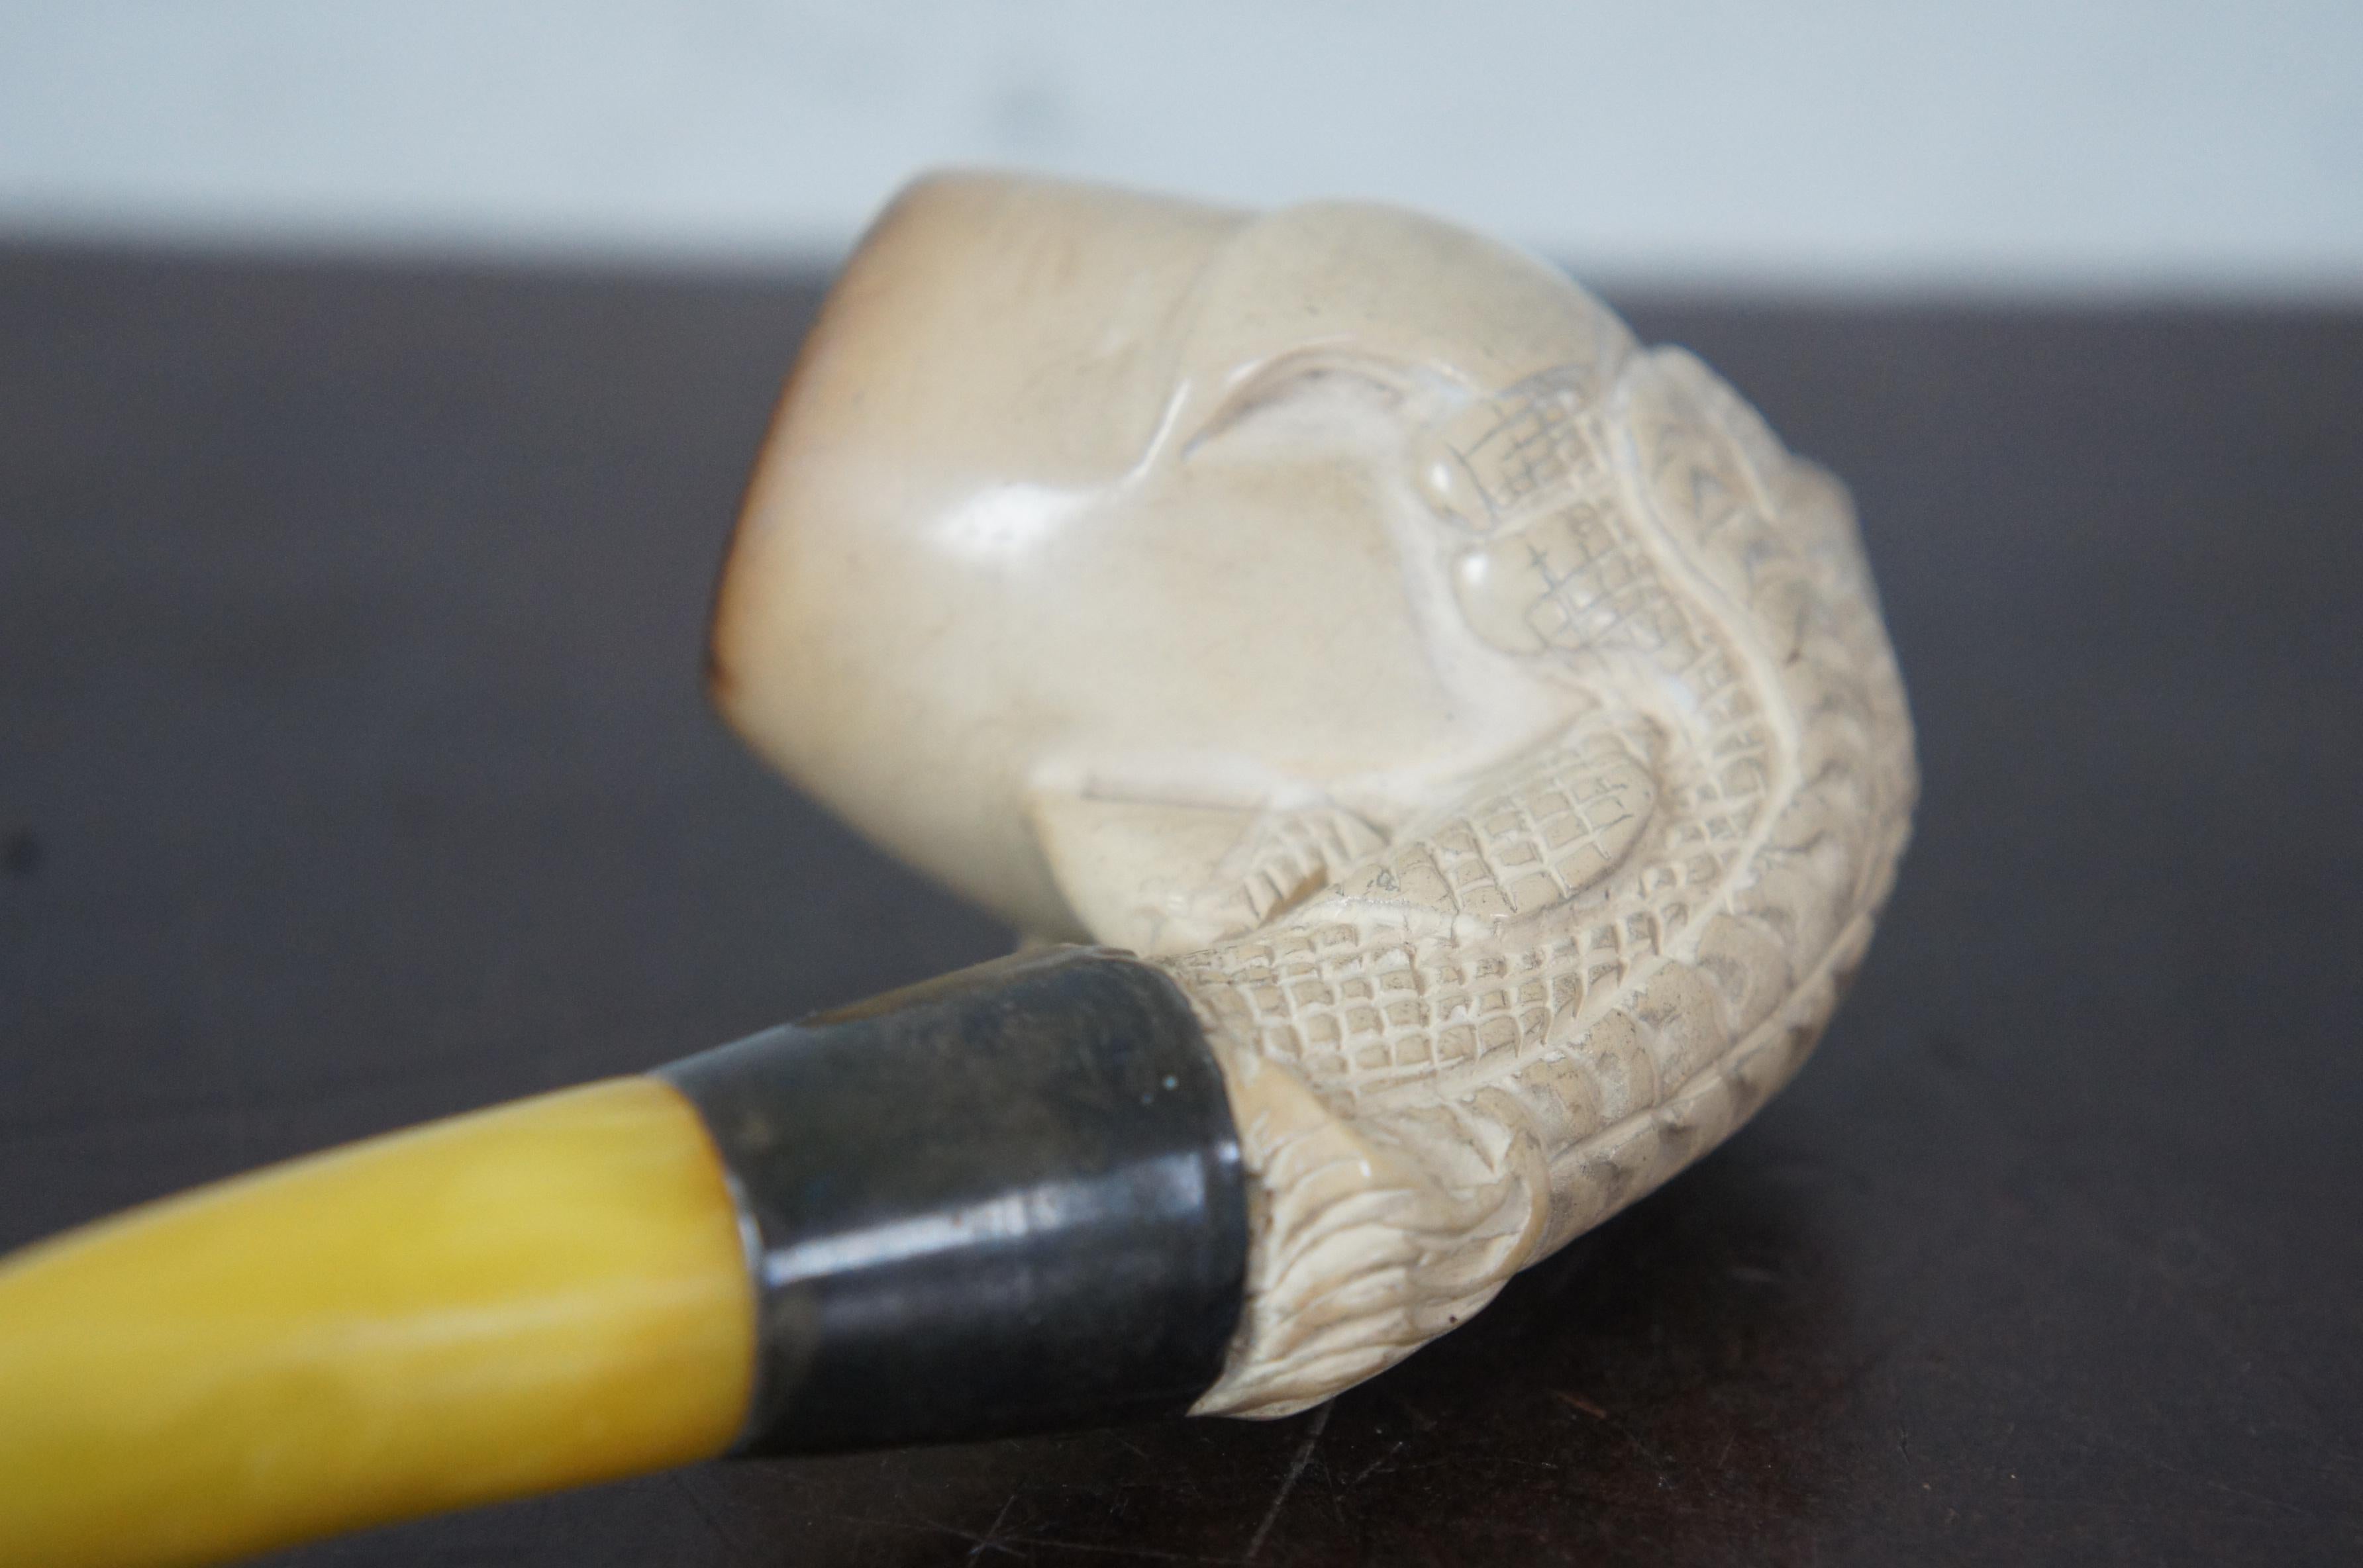 Victorian Antique Carved Dragon Eagle Claw Meerschaum Pipe RL&S Sterling Bakelite Case